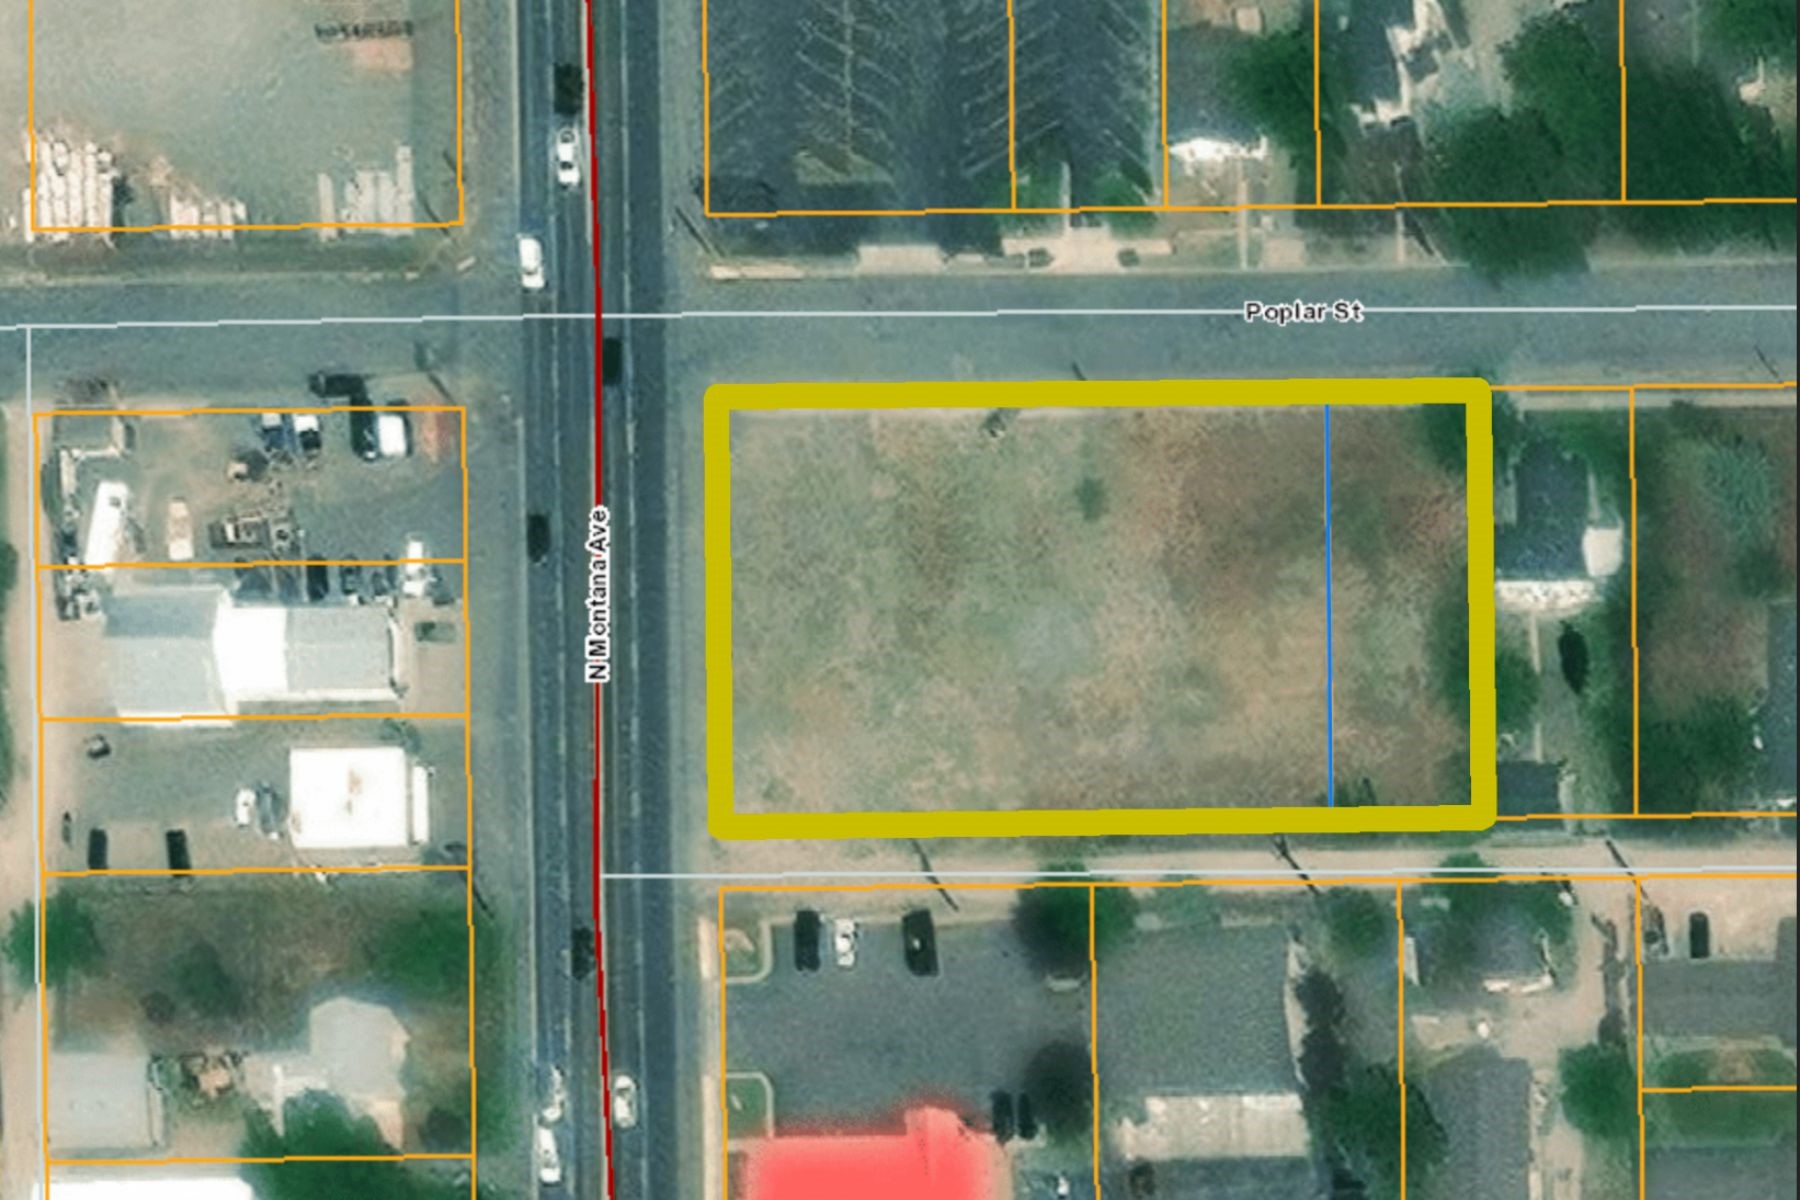 Fantastic location for a commercial development! Almost an acre (35,000 SF) of land with great frontage on N Montana Avenue. This property is zoned B-2 and ready for your business! There is 24-hr traffic with a count of 10,000+ vehicles. Call Breena Buettner at 406-302-8633 or your real estate professional.